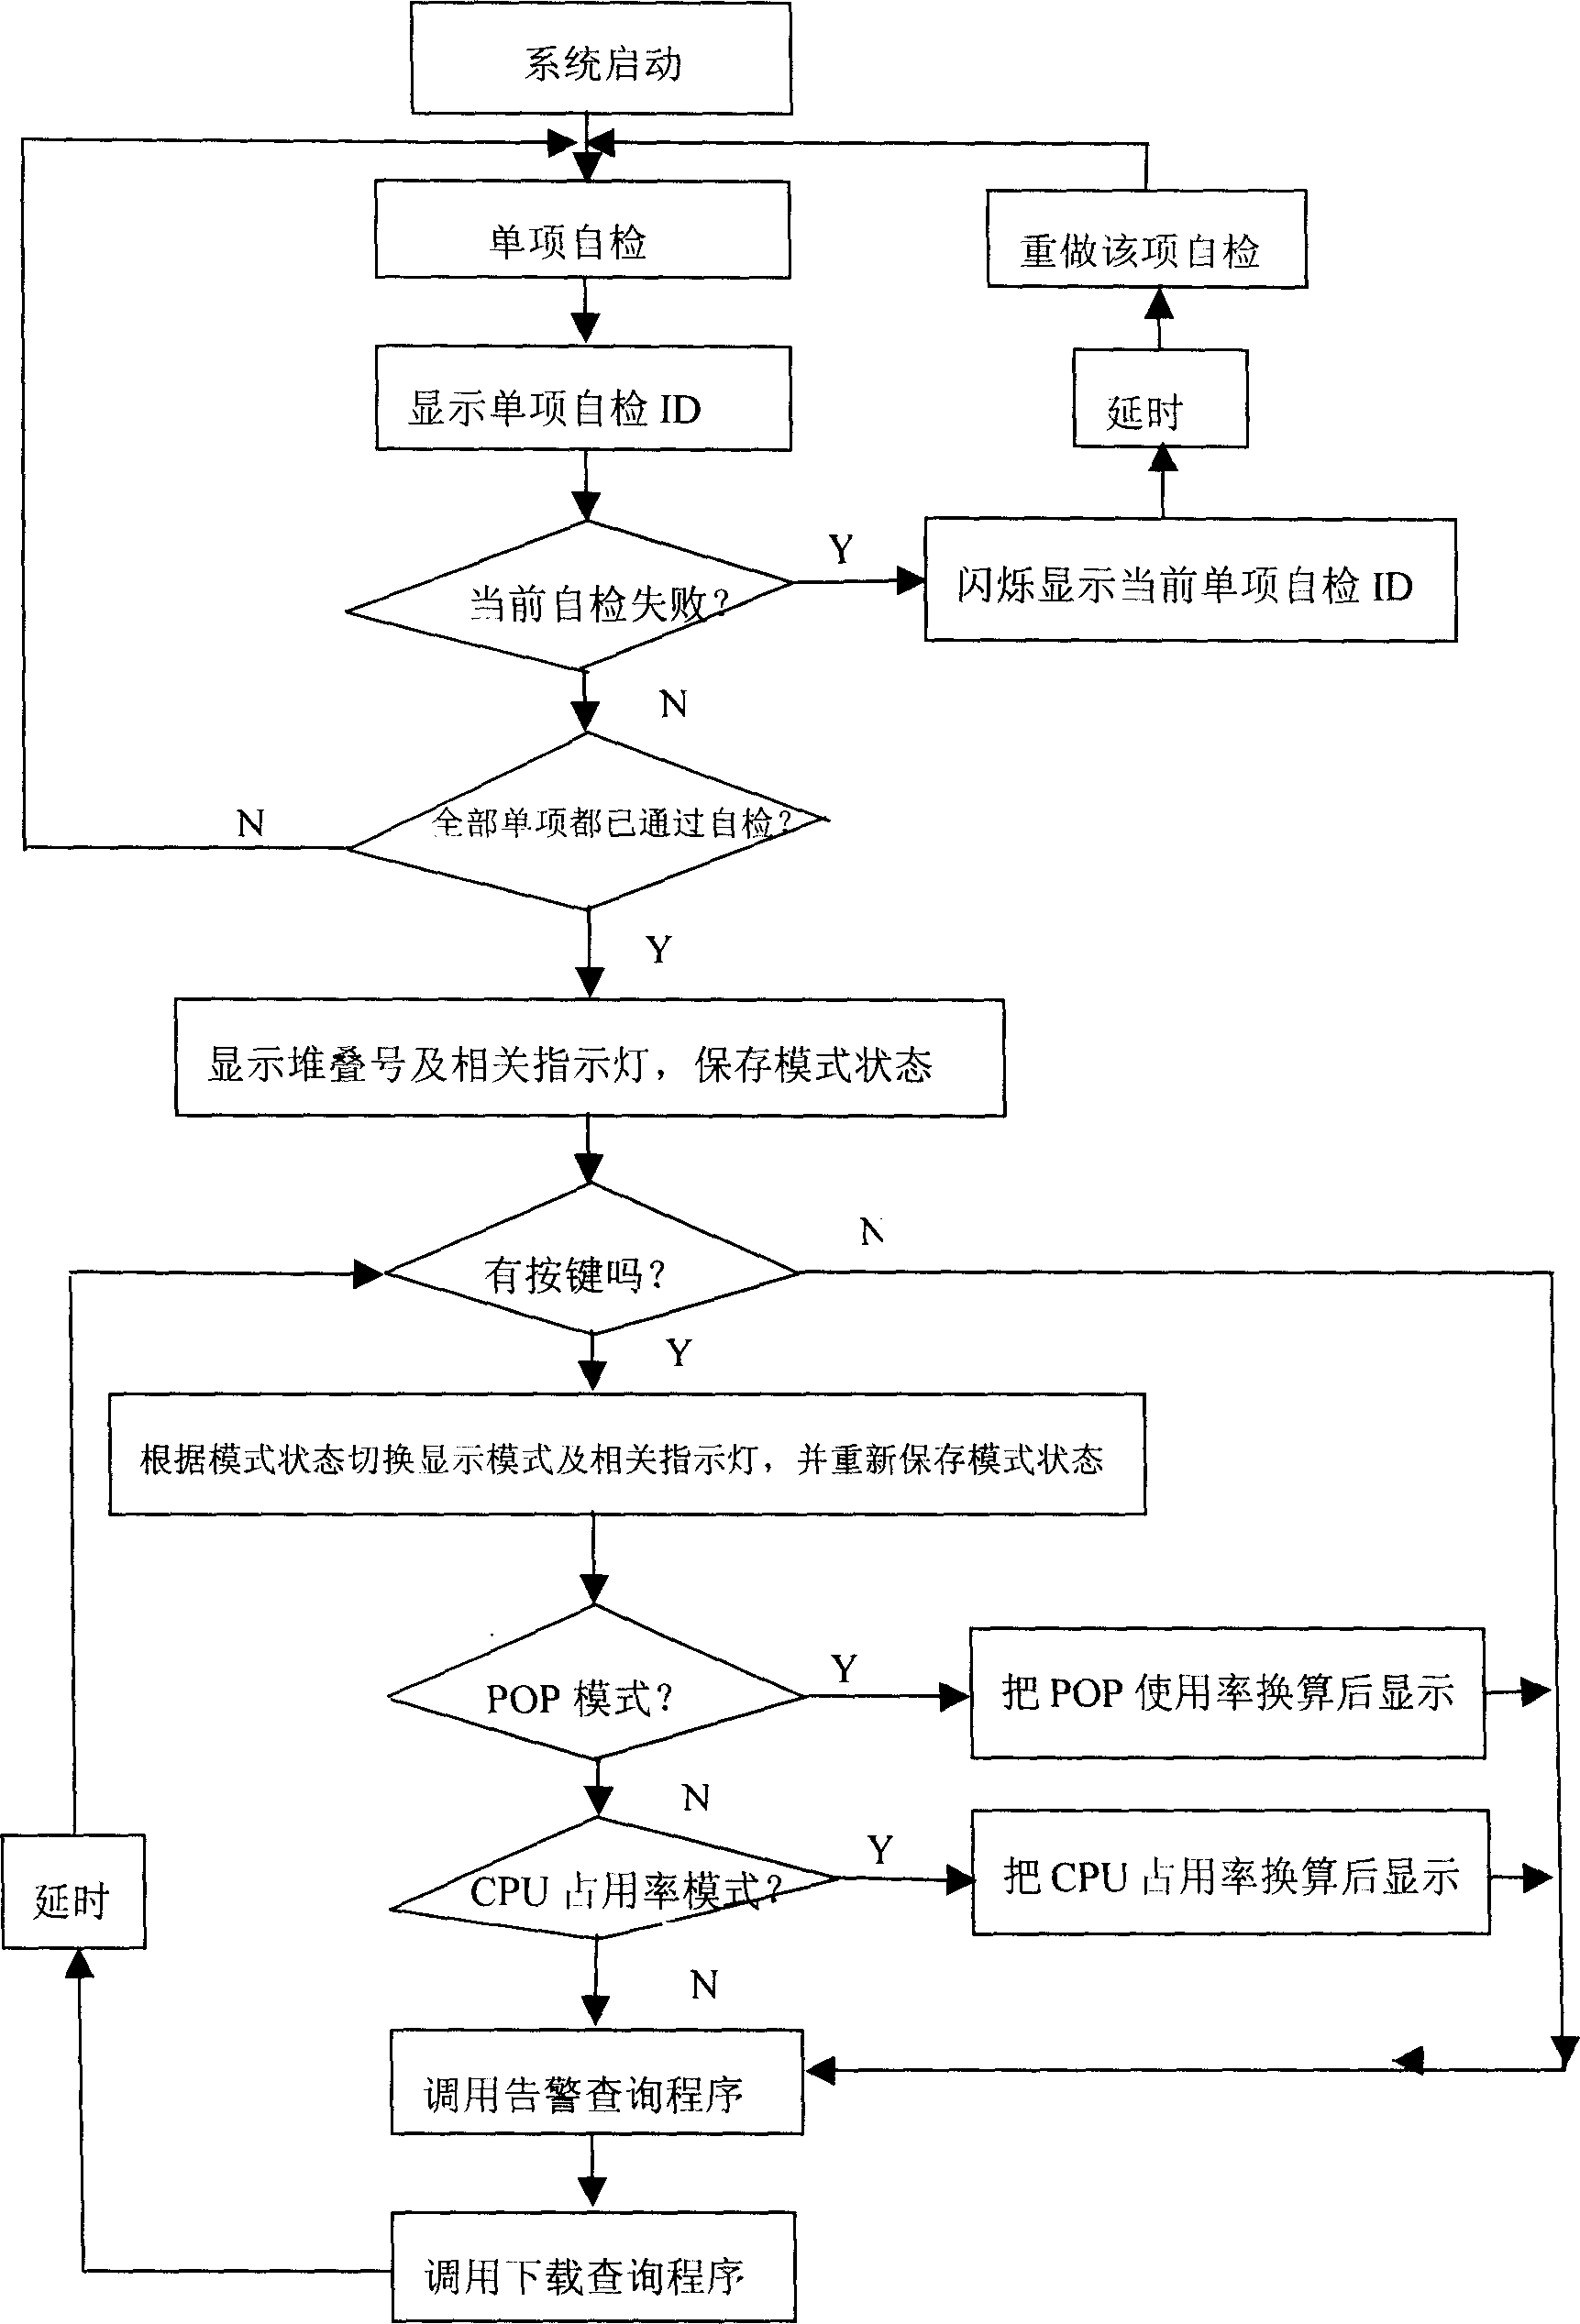 Method and apparatus for realizing multi-meaning display by seven segment digital tubes